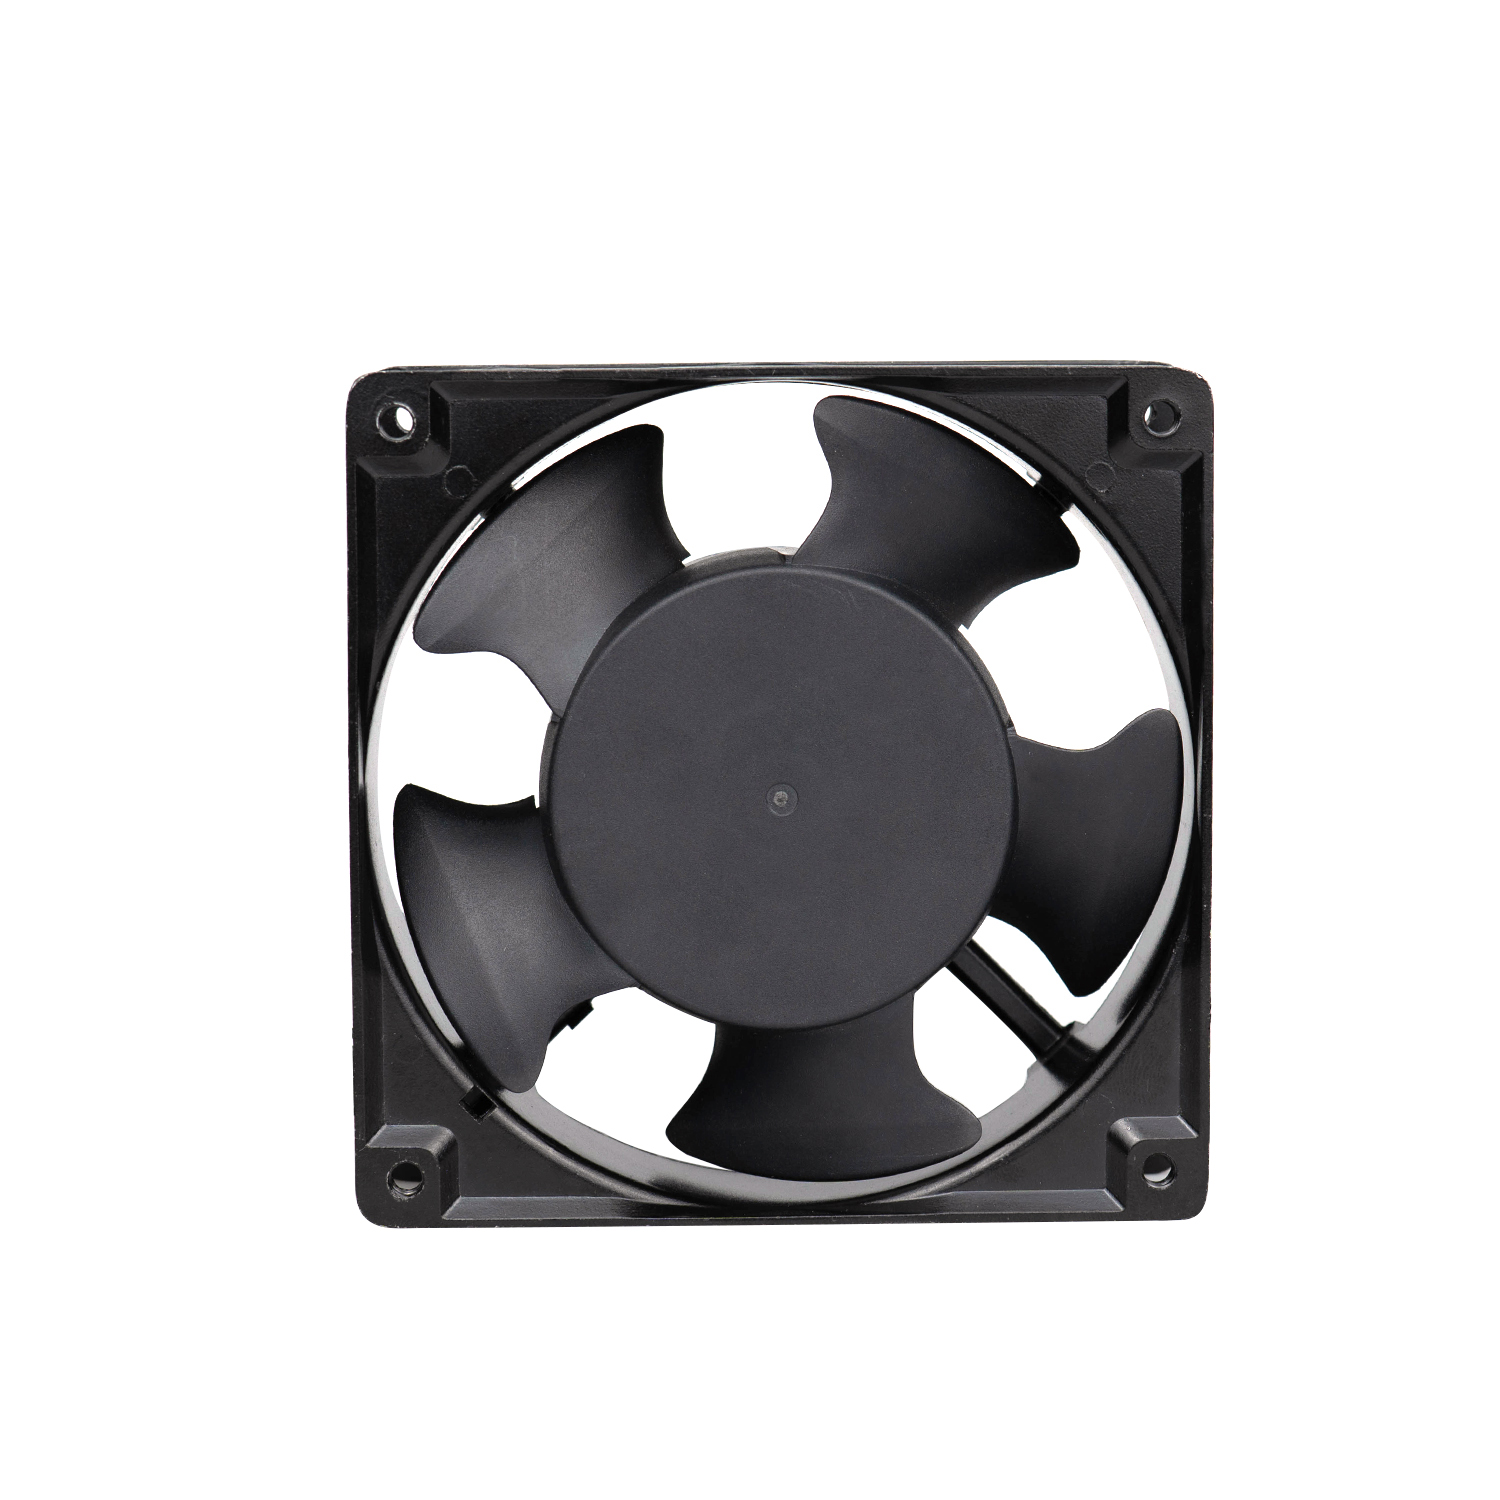 compact 110v 230v 120mm AC Axial Fan for welding 